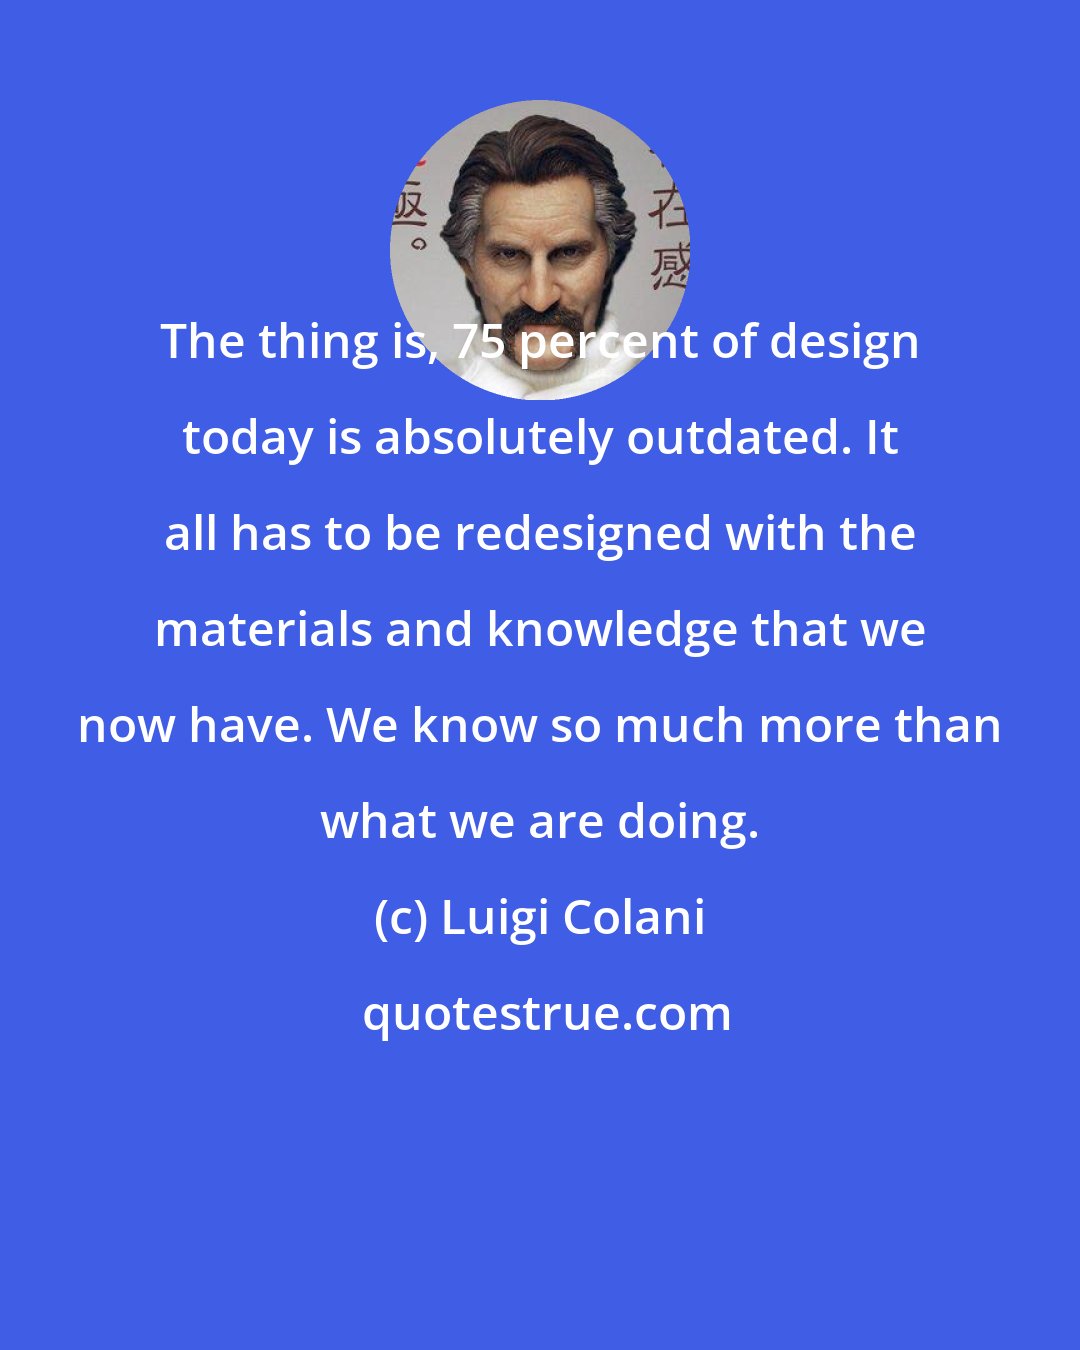 Luigi Colani: The thing is, 75 percent of design today is absolutely outdated. It all has to be redesigned with the materials and knowledge that we now have. We know so much more than what we are doing.